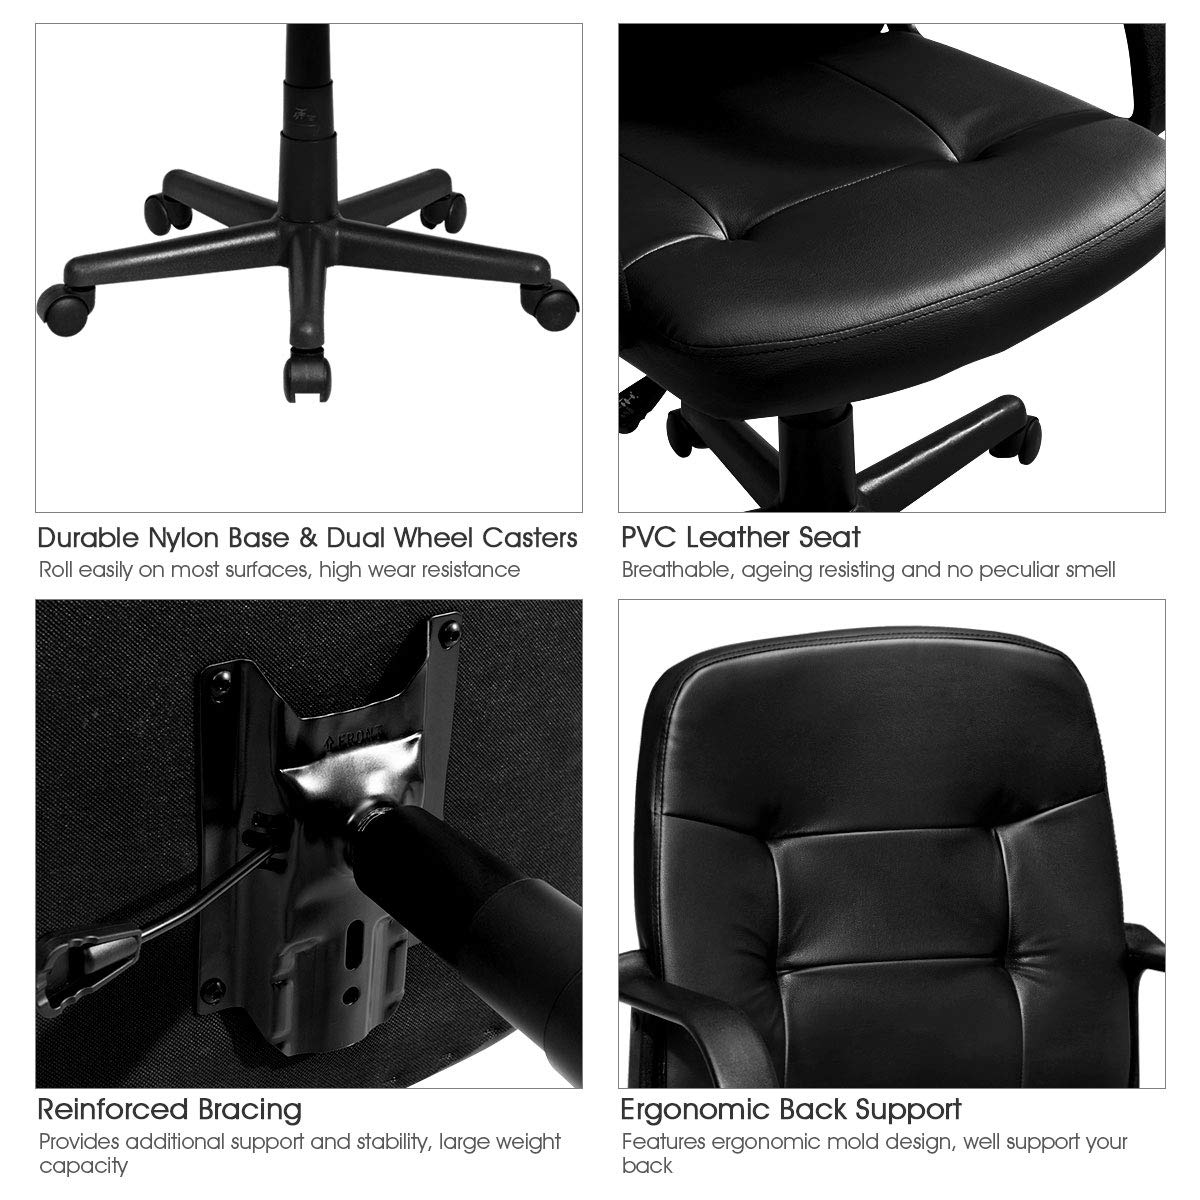 Giantex Ergonomic Office Chair Black Mid-Back Leather Computer Desk Chair with Arms